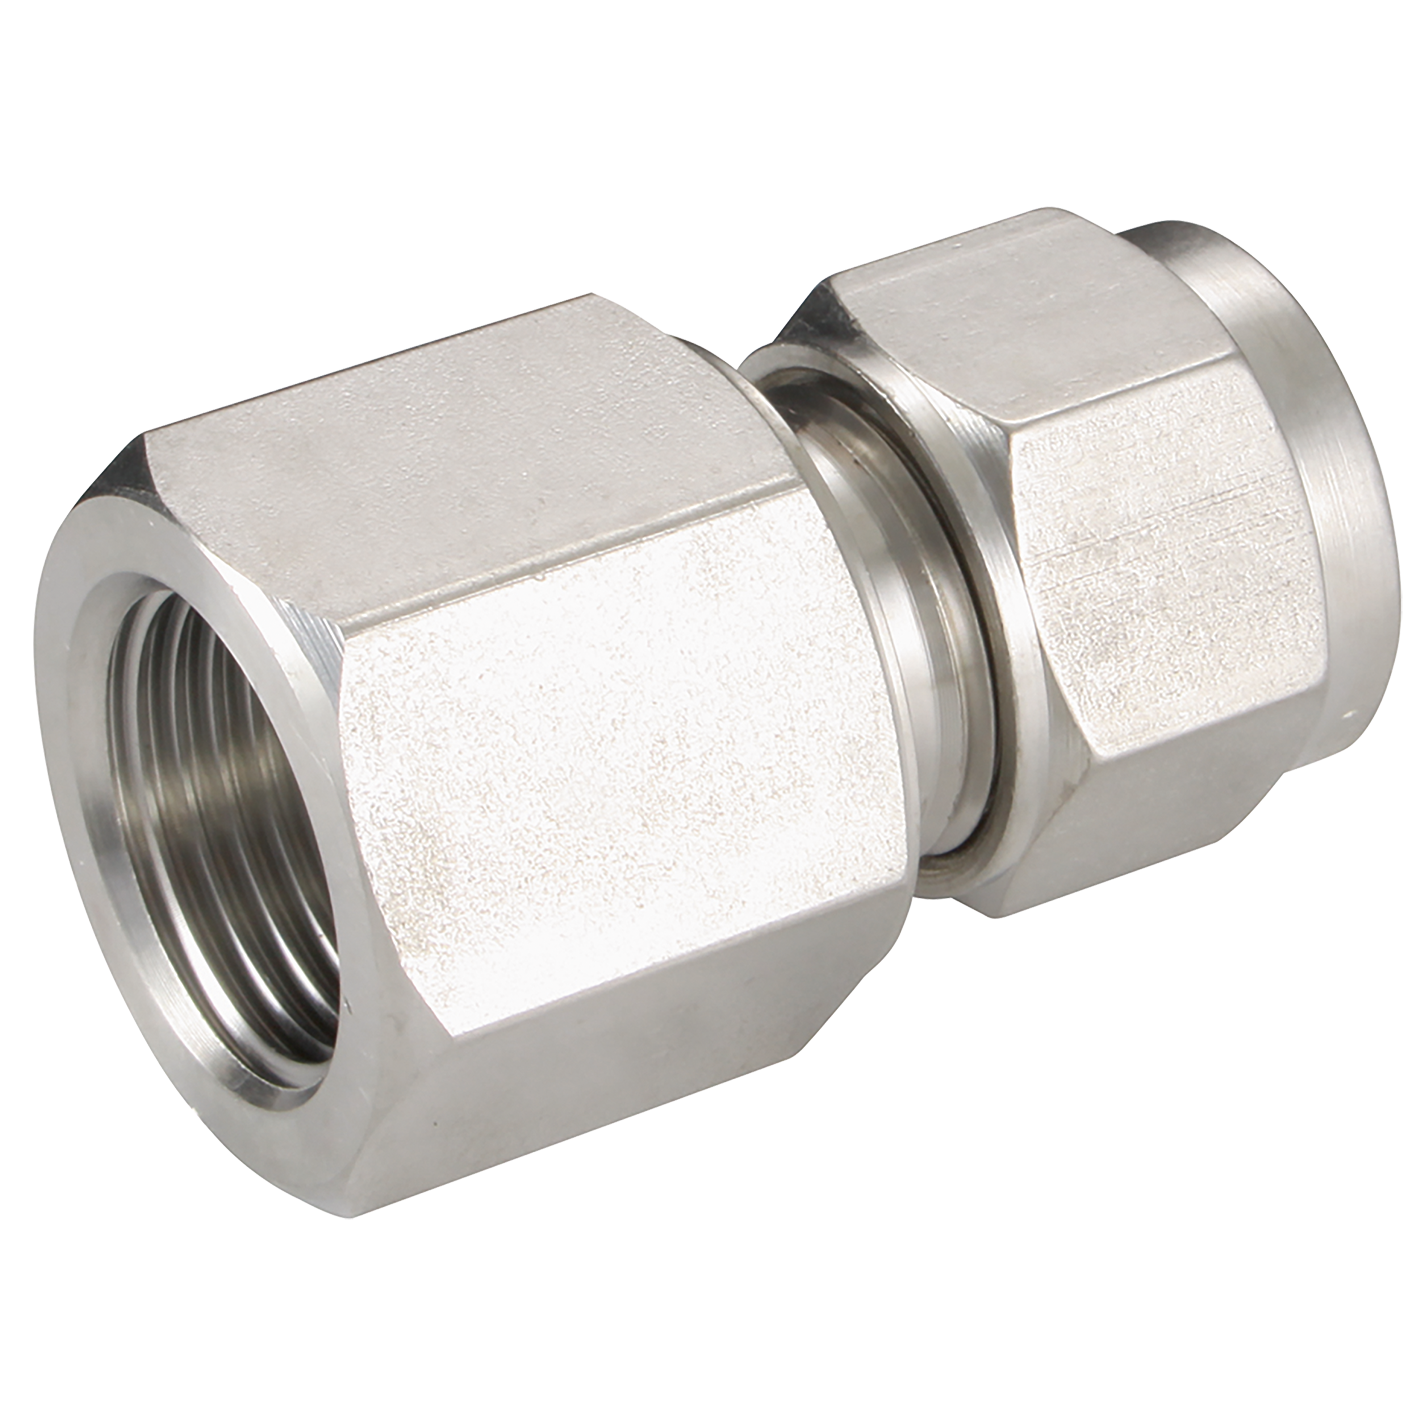 FEMALE ISO CONNECTOR 1/4 OD 1/4 BSPT